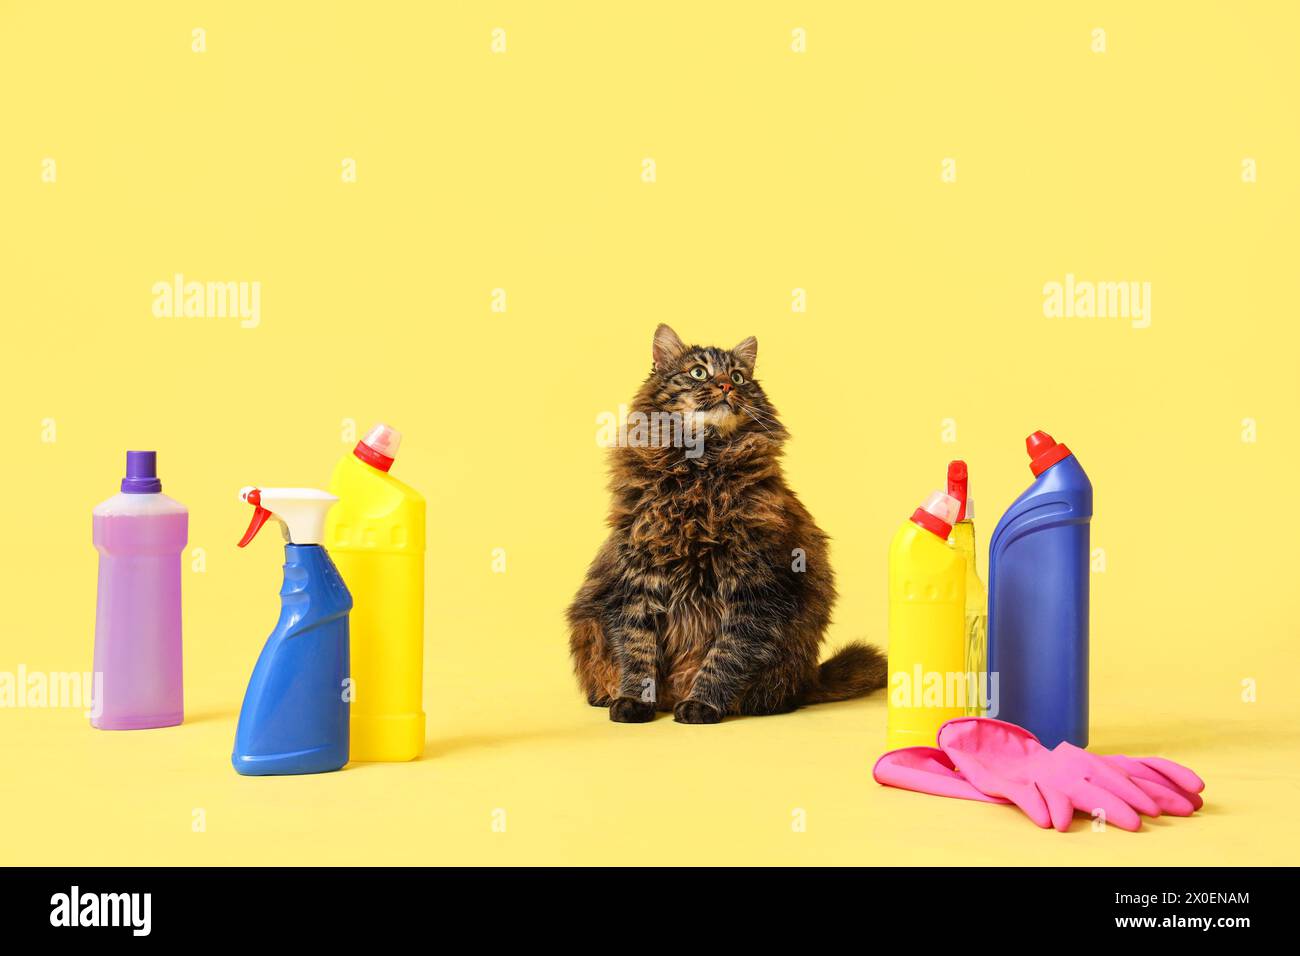 Cute cat with bottles of detergent and rubber gloves on yellow background Stock Photo